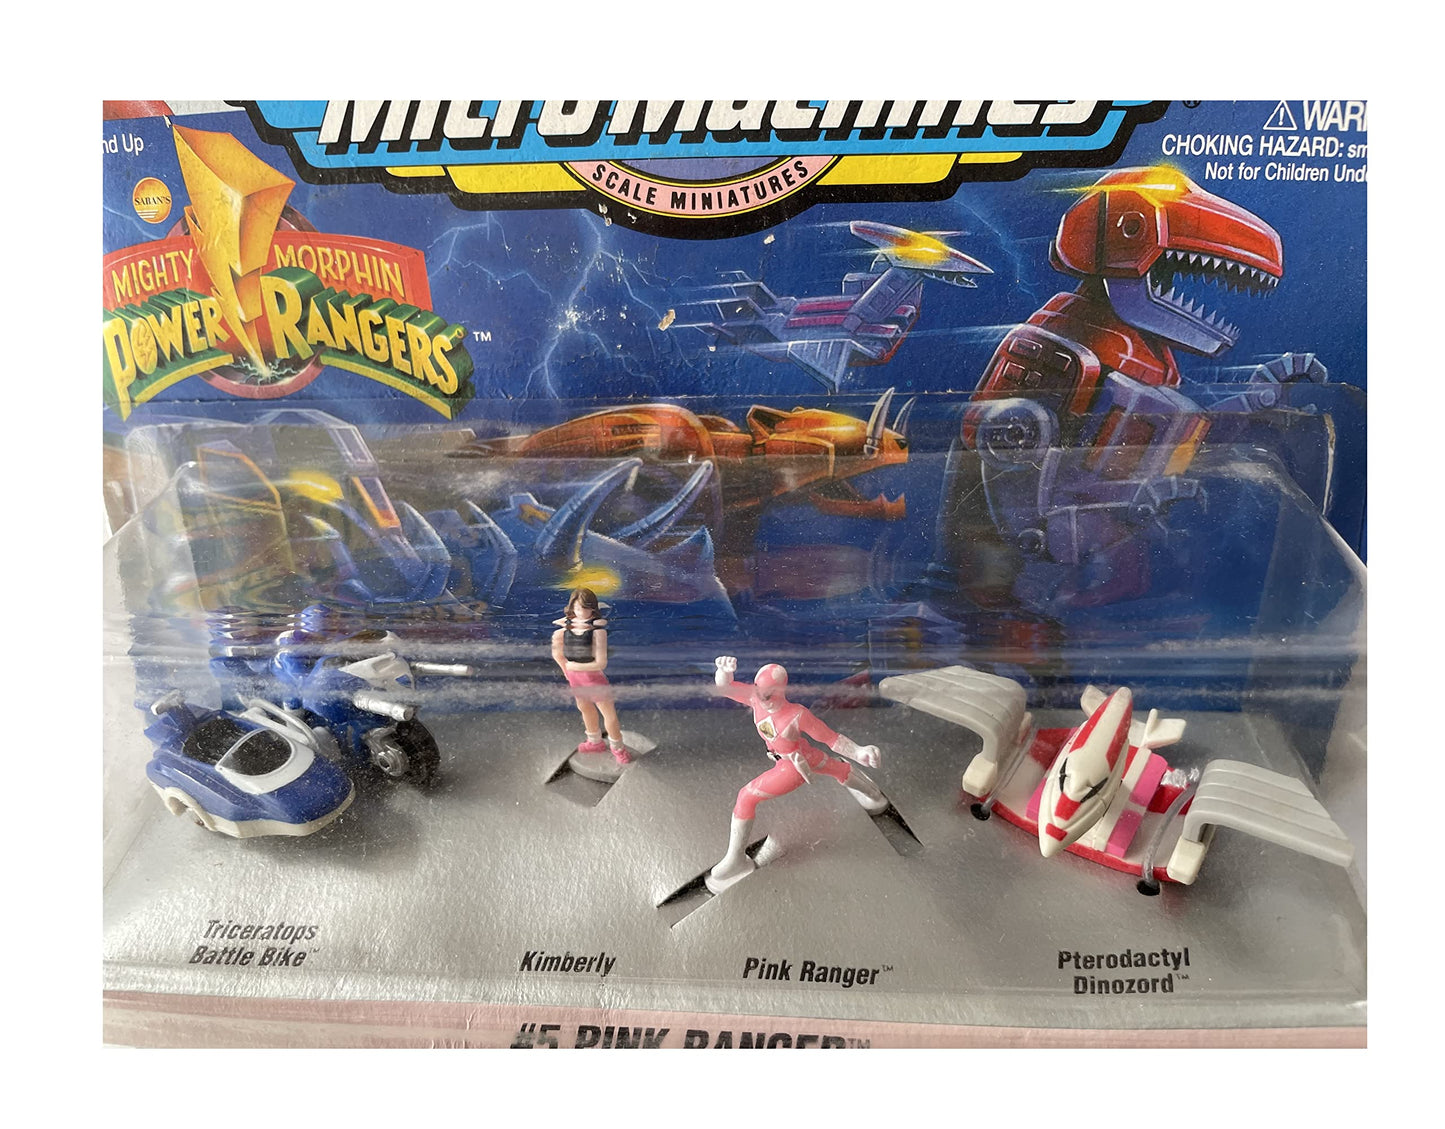 Vintage 1994 Mighty Morphin Power Rangers Micro Machines Miniature The Pink Ranger Set No. 5 - Includes The Pink Ranger Figure, Kimberly Figure, Pterodactyl Dinozord and The Triceratops Battle Bike With The Blue Ranger - Unsold Shop Stock Room Find